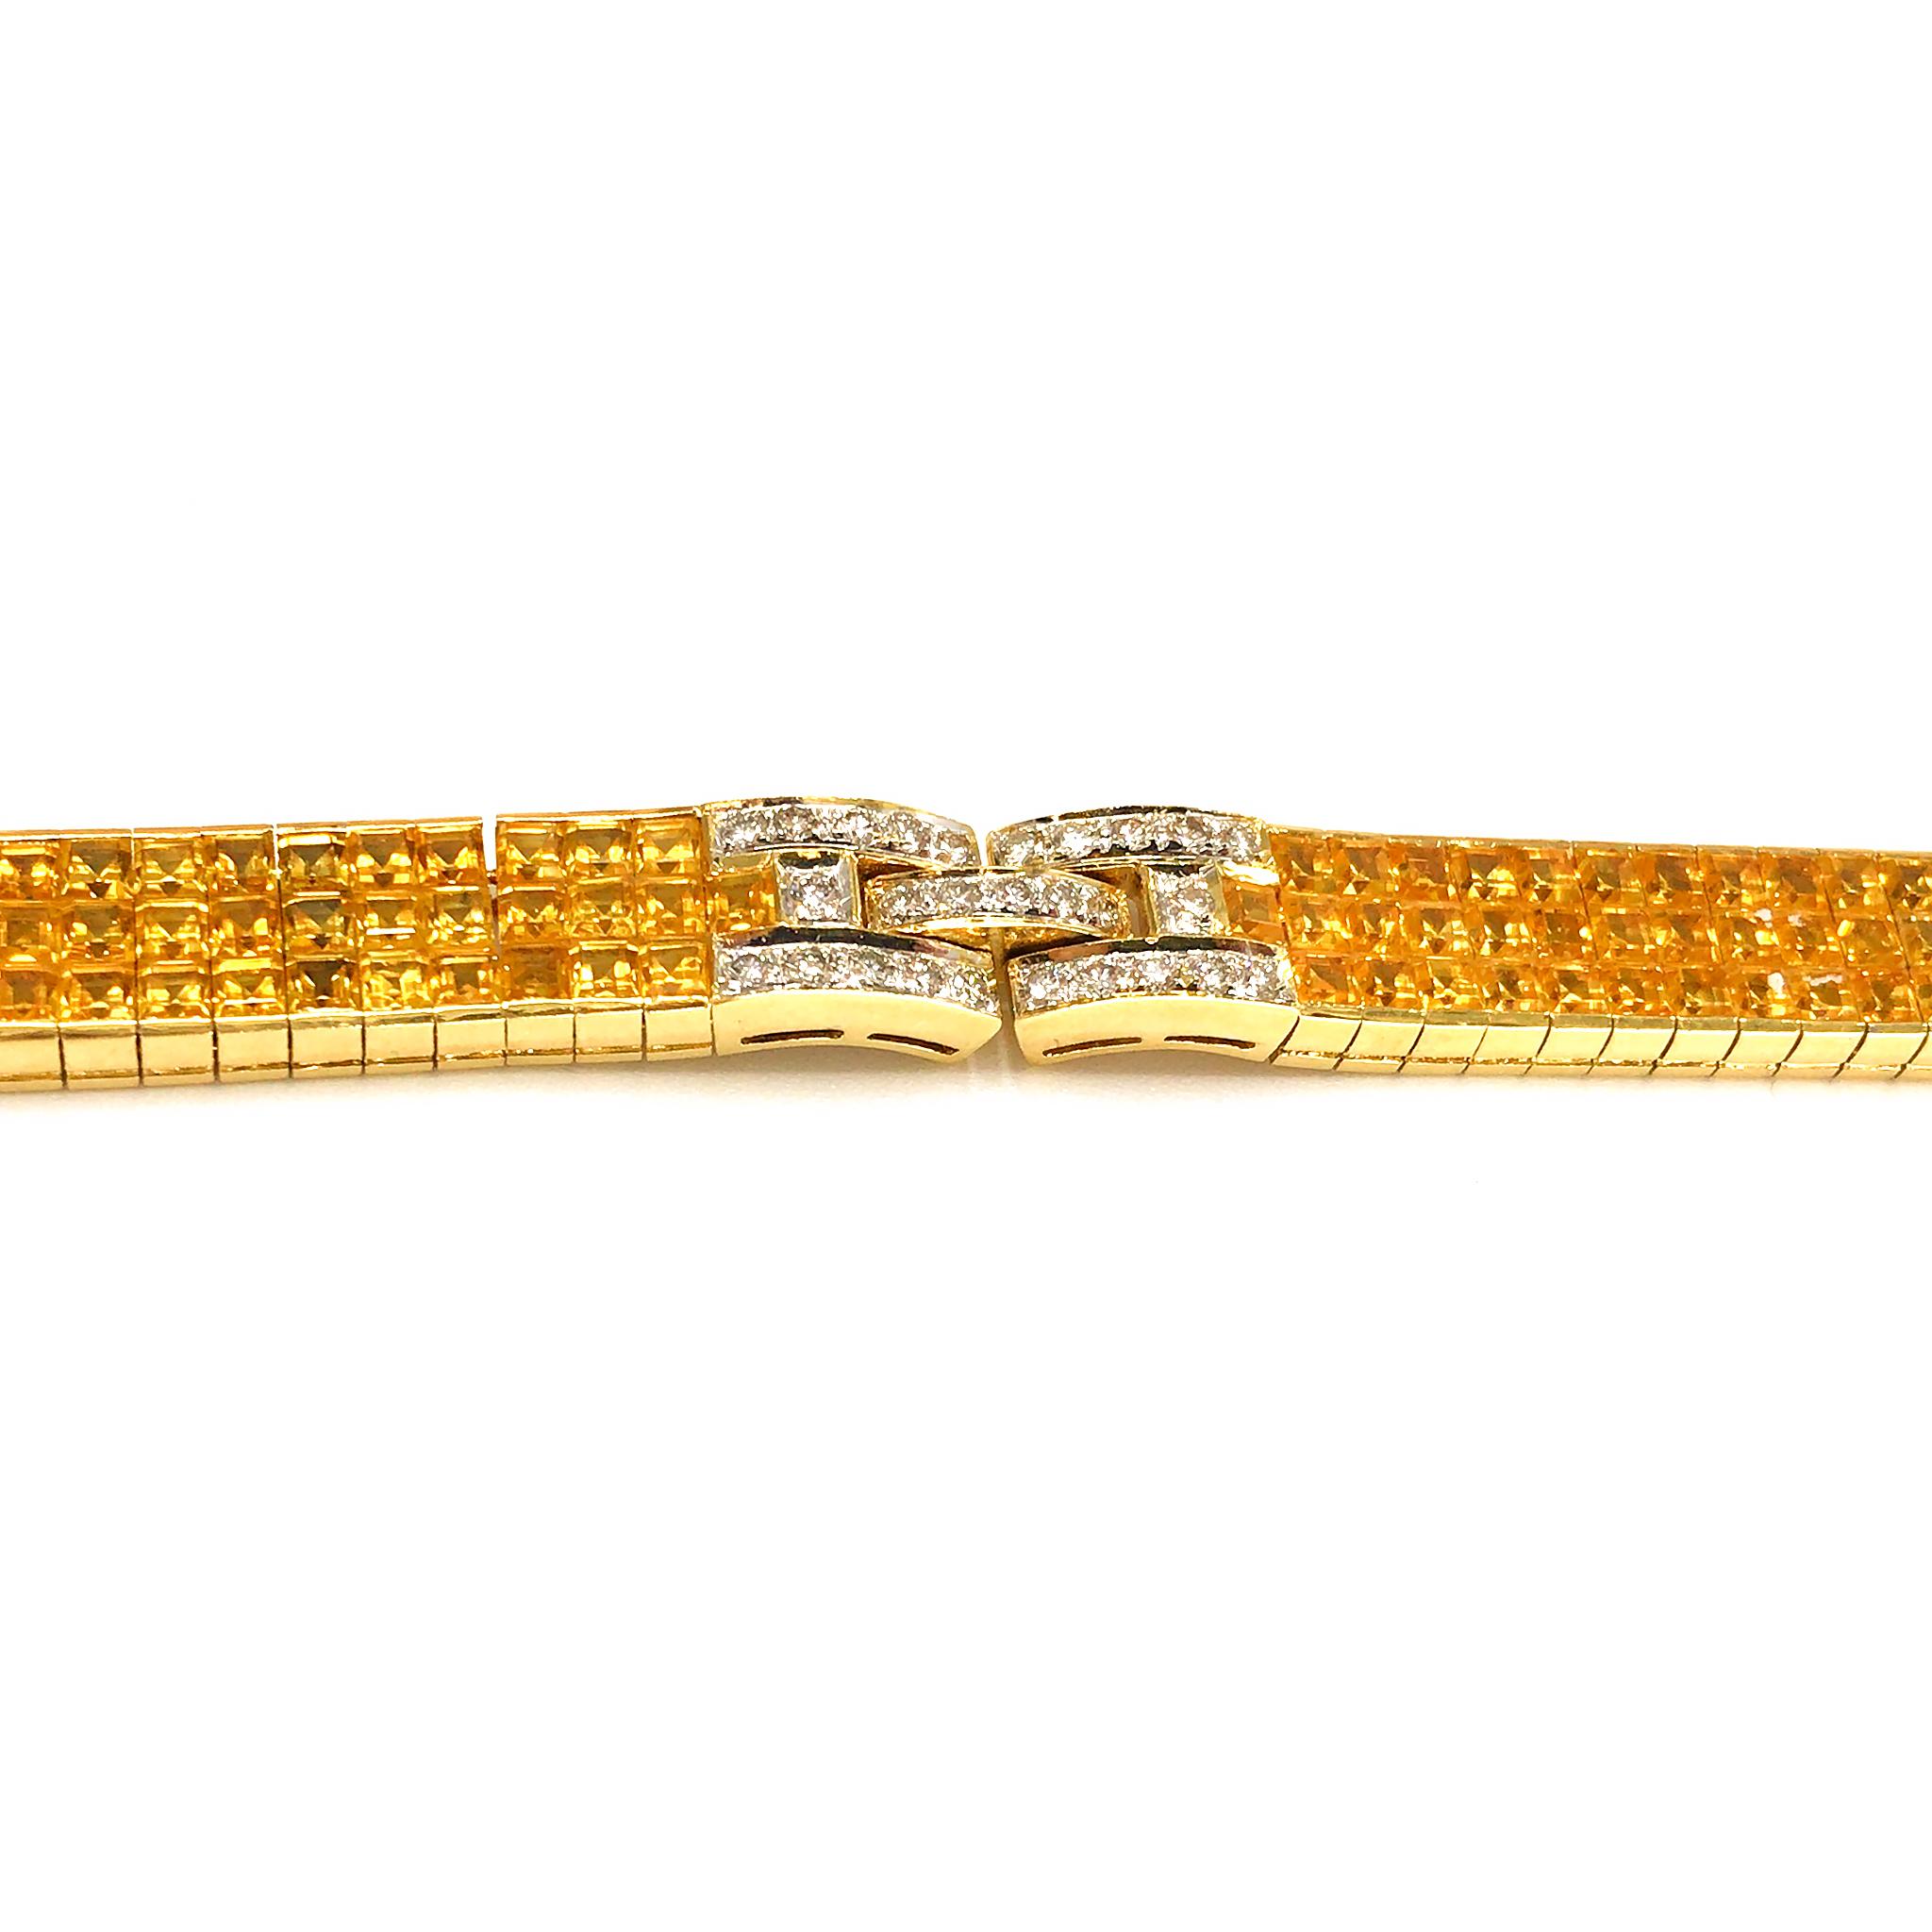 18k Yellow Gold
Diamond: 1.70 ct twd (estimated)
Yellow Sapphire: 23.30 tcw
Length: 7 inches
Total Weight: 44.1 grams